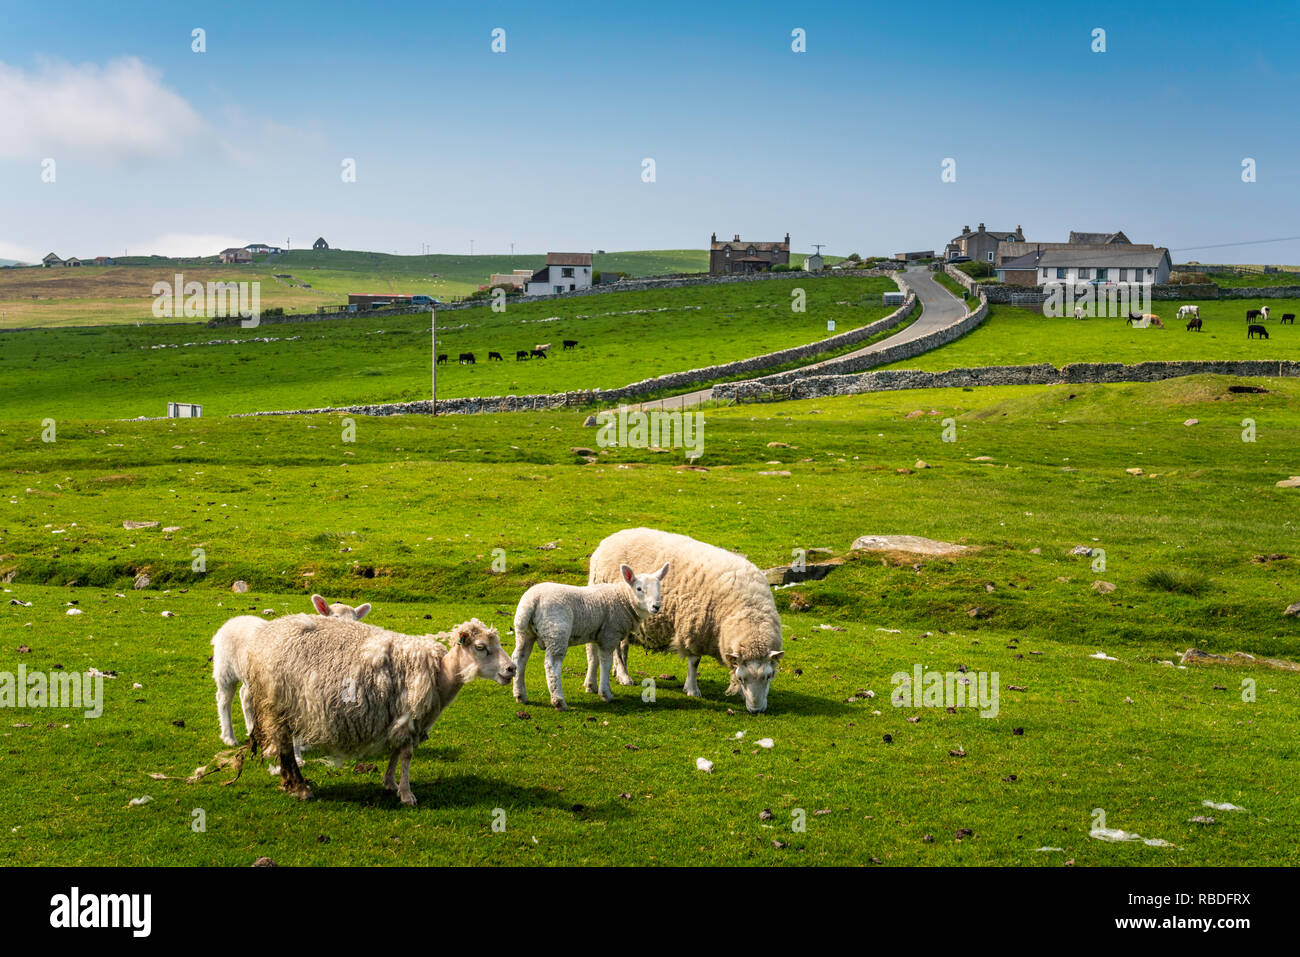 Sheep grazing in the pasture at a small village in the countryside near Lerwick, Shetland, Scotland, United Kingdom, Europe. Stock Photo